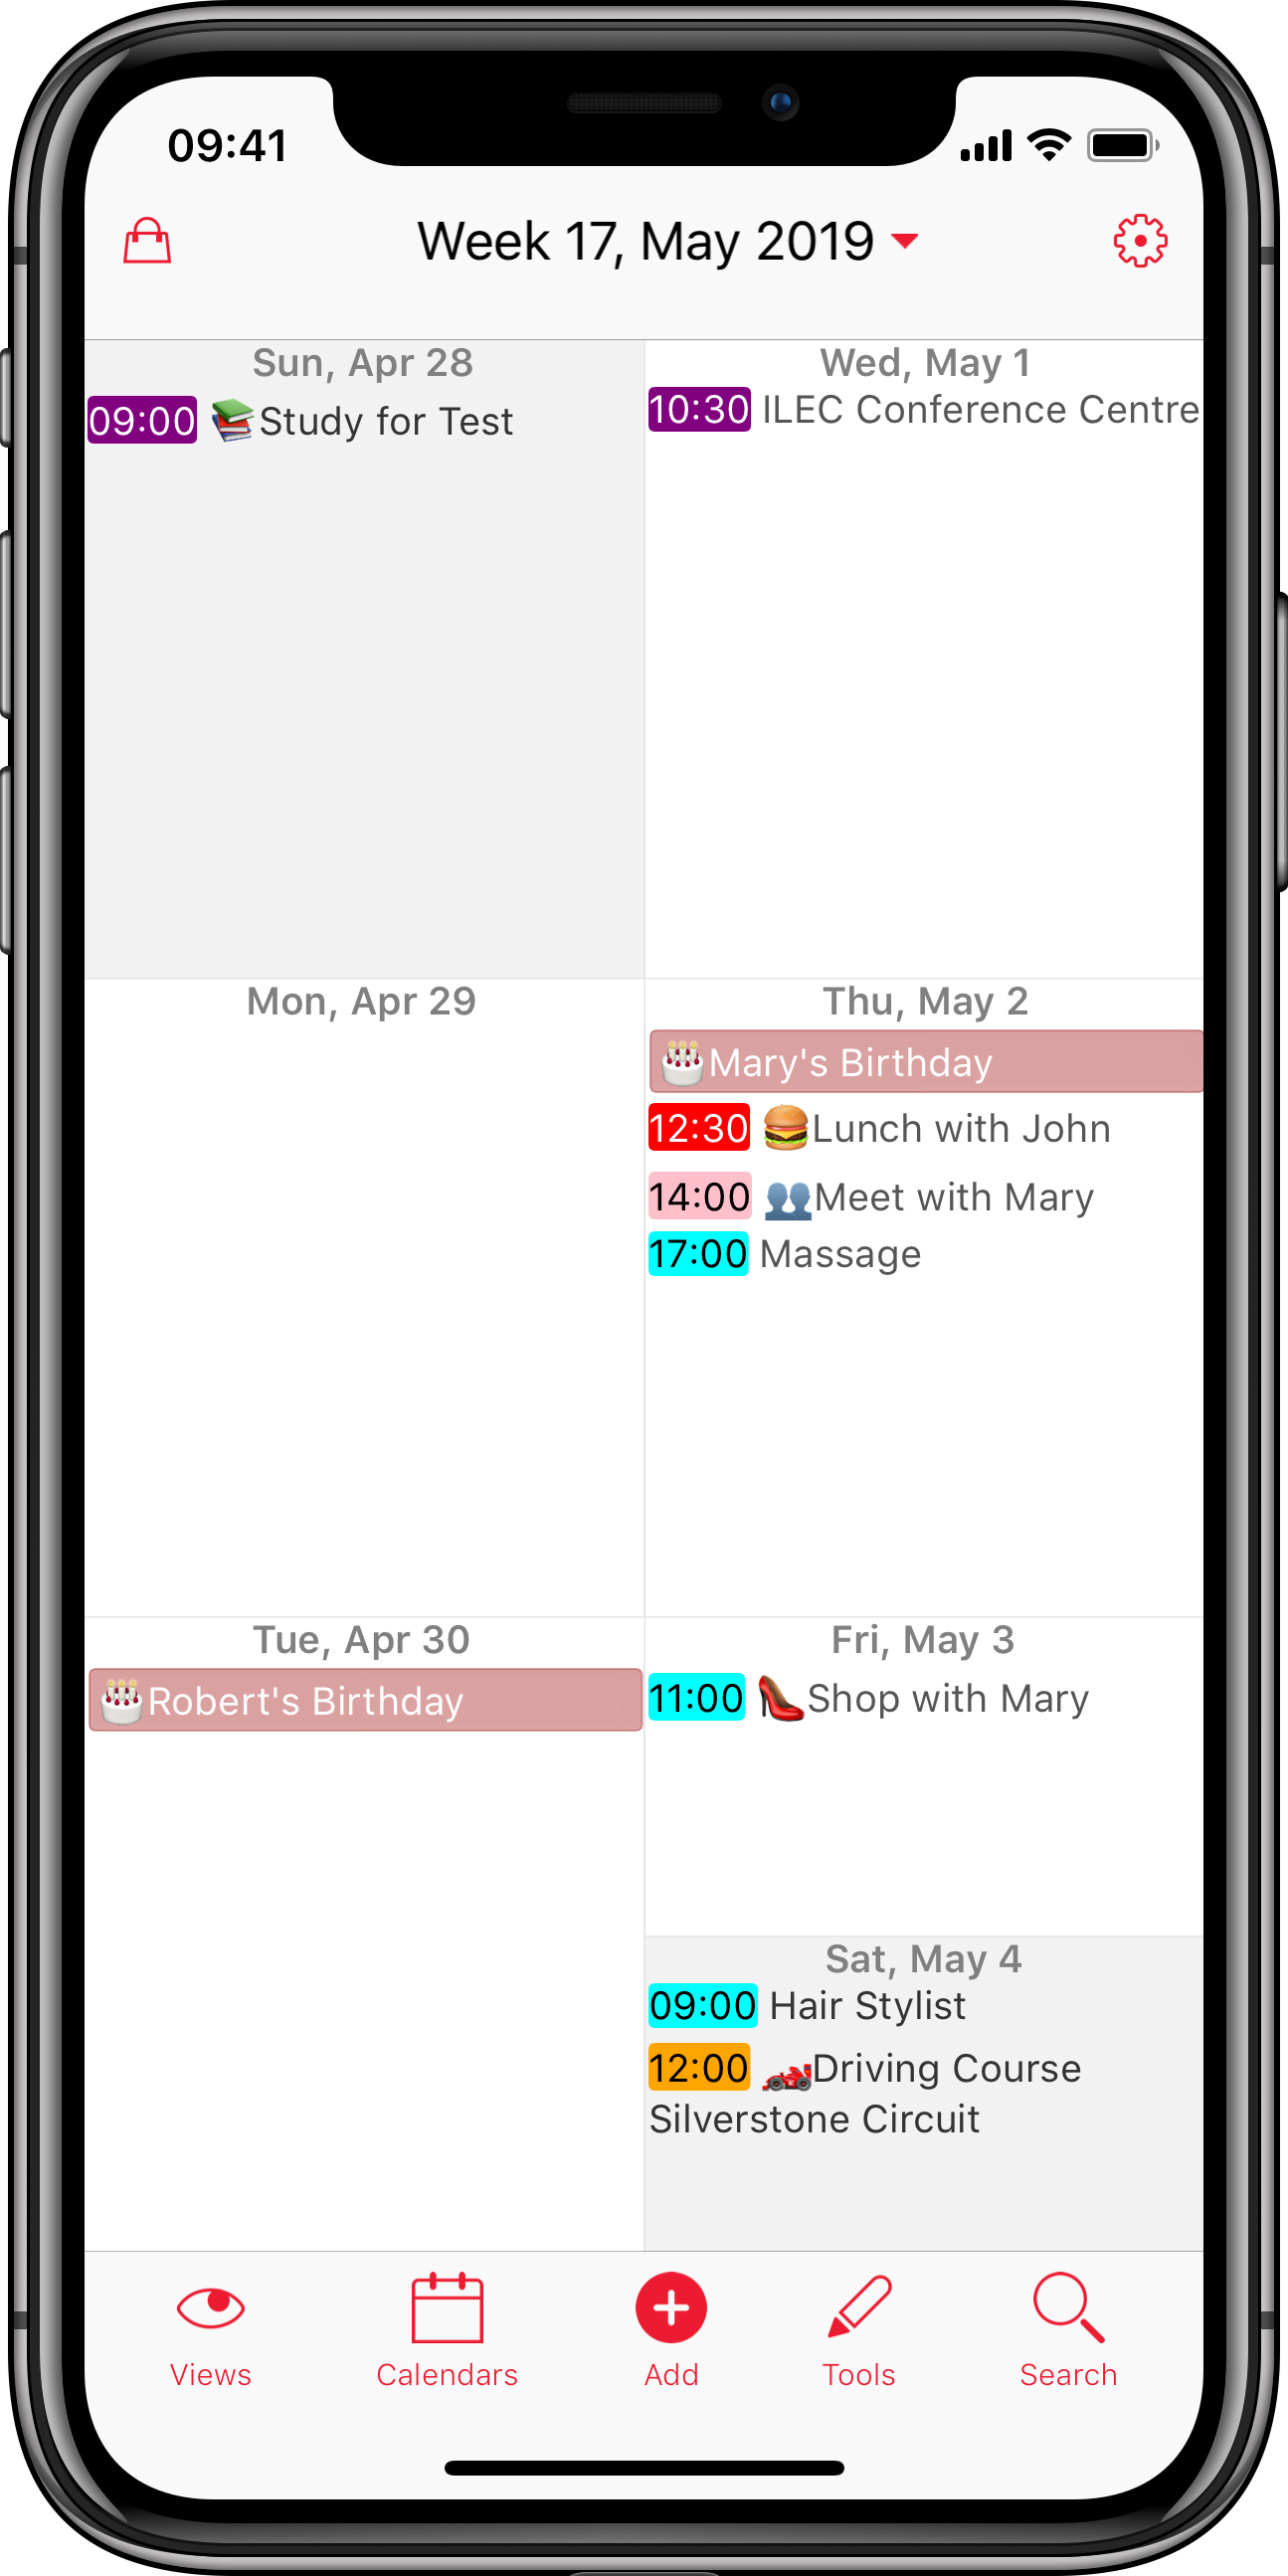 mac calendar shows all events for a second, then shows only shared events calendar